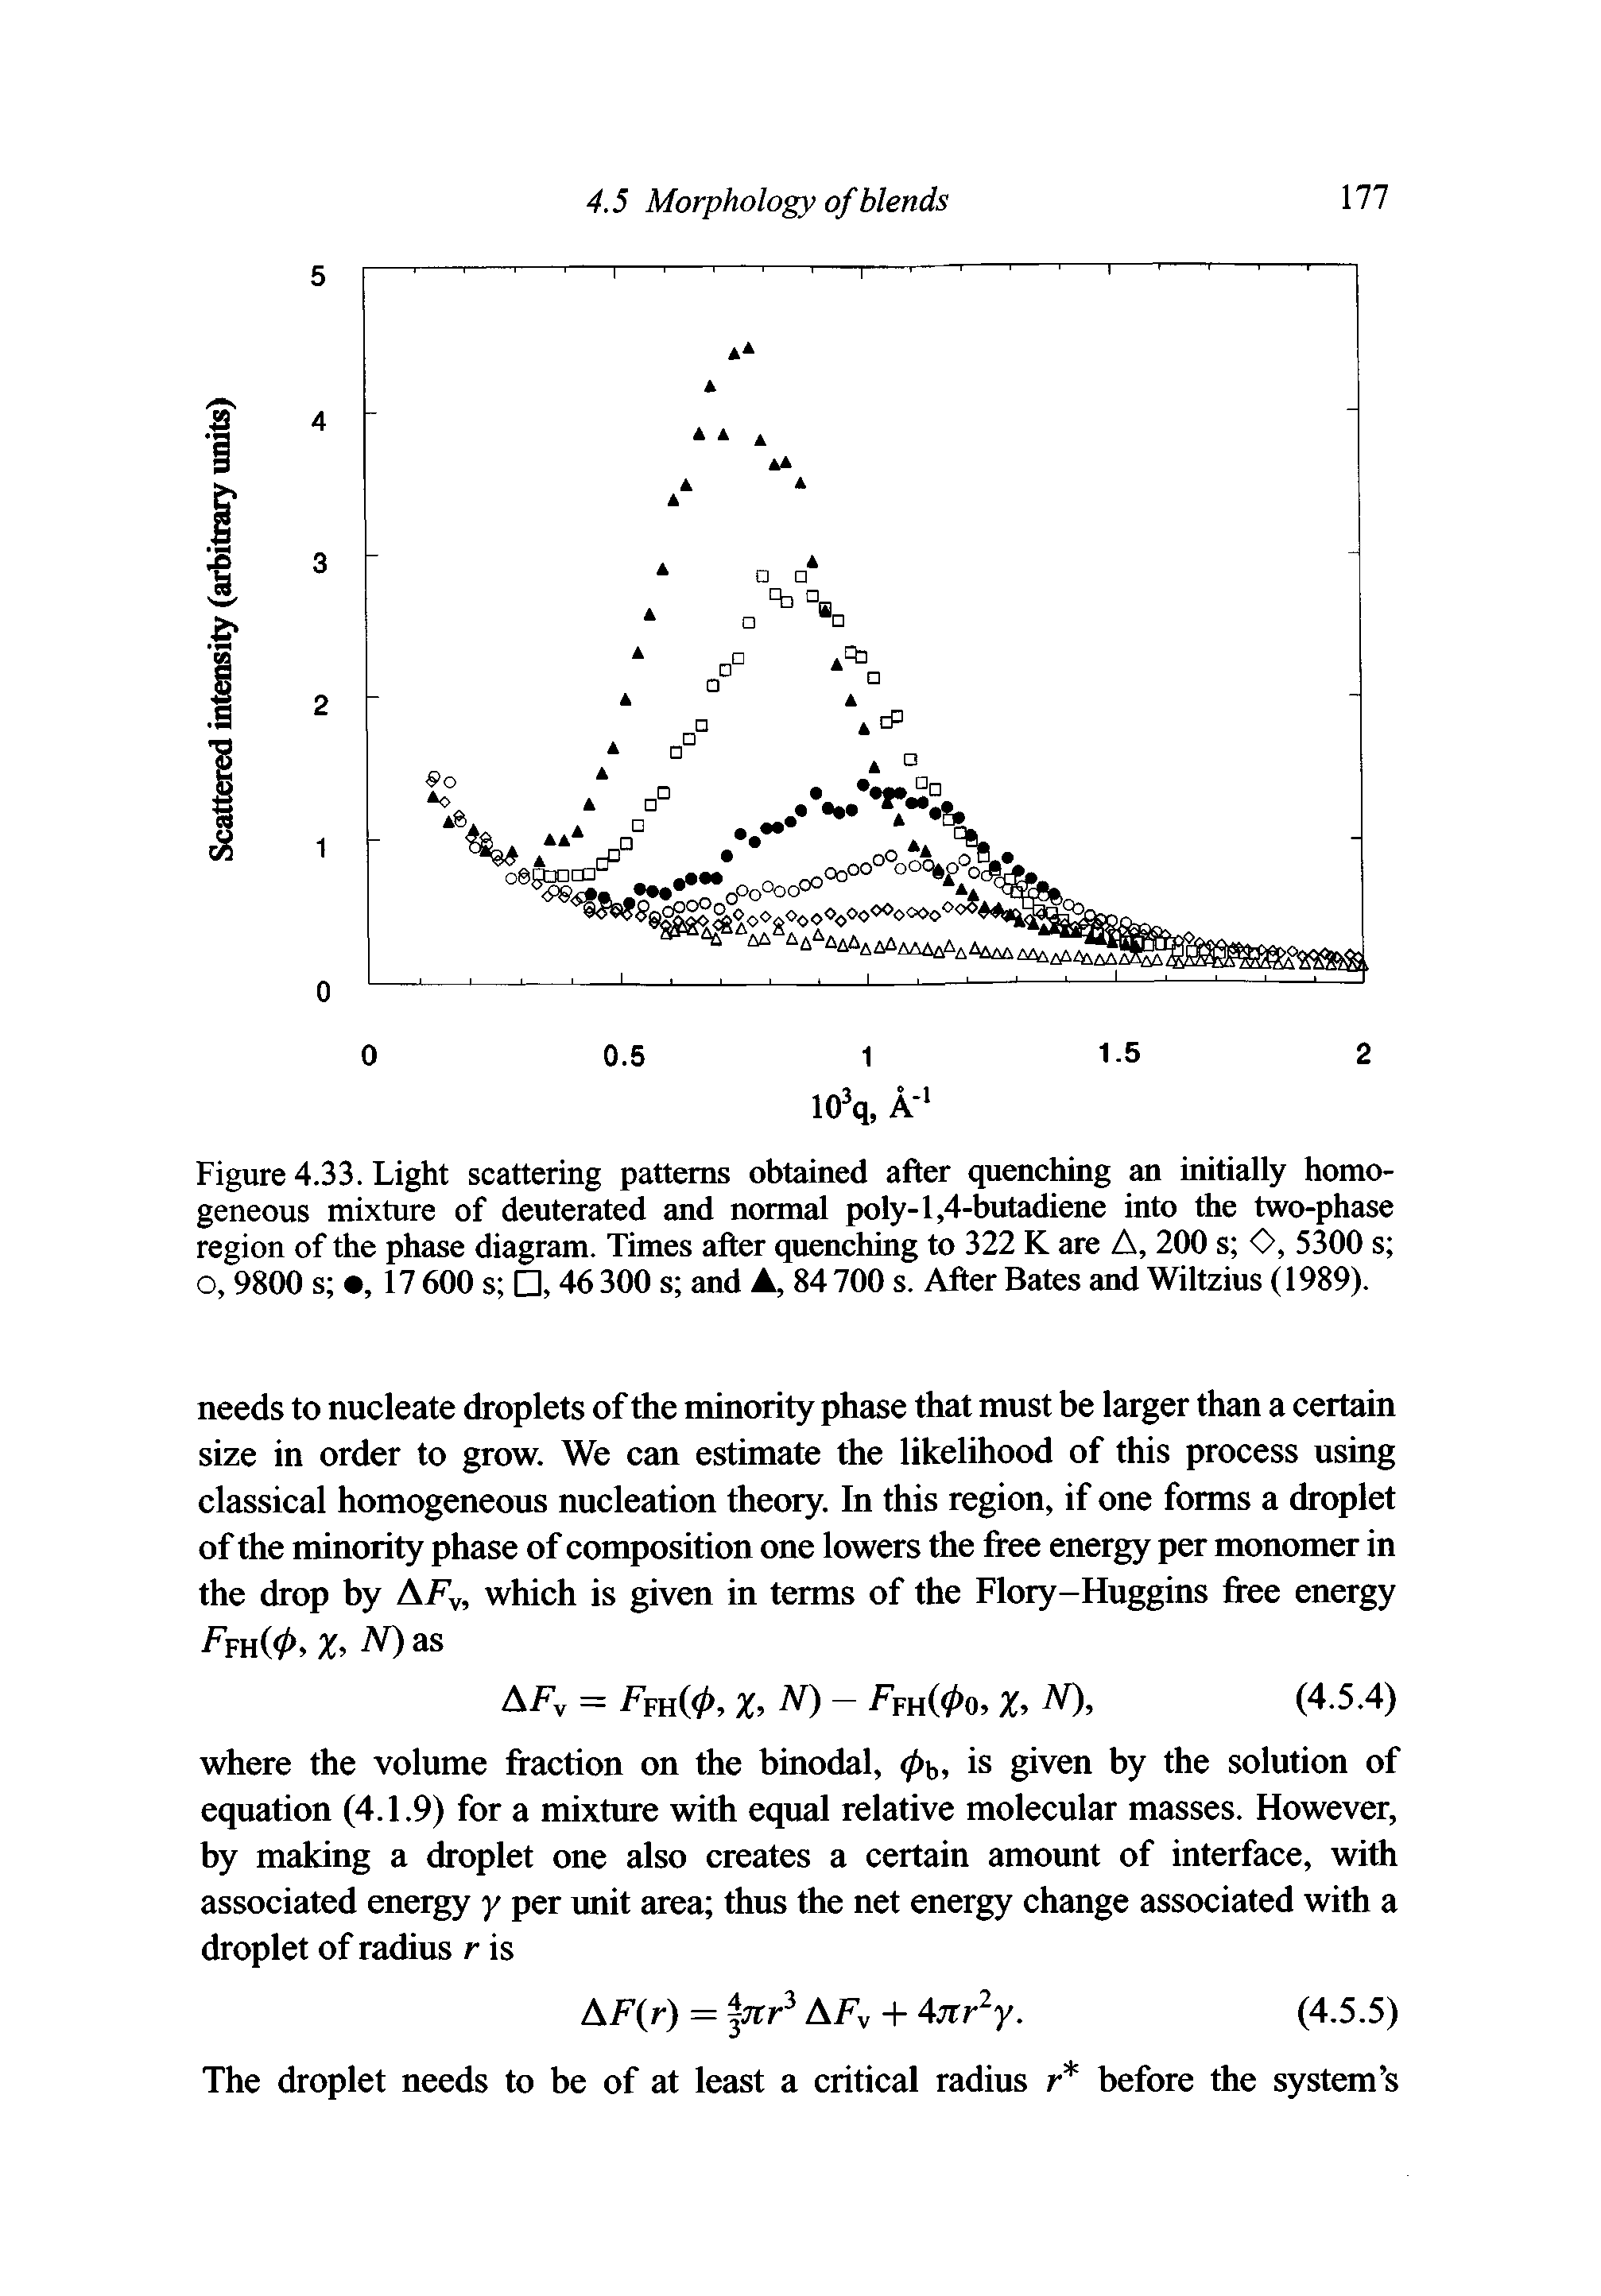 Figure 4.33. Light scattering patterns obtained after quenching an initially homogeneous mixture of deuterated and normal poly-1,4-butadiene into the two-phase region of the phase diagram. Times after quenching to 322 K are A, 200 s O, 5300 s o, 9800 s , 17 600 s , 46 300 s and A, 84 700 s. After Bates and Wiltzius (1989).